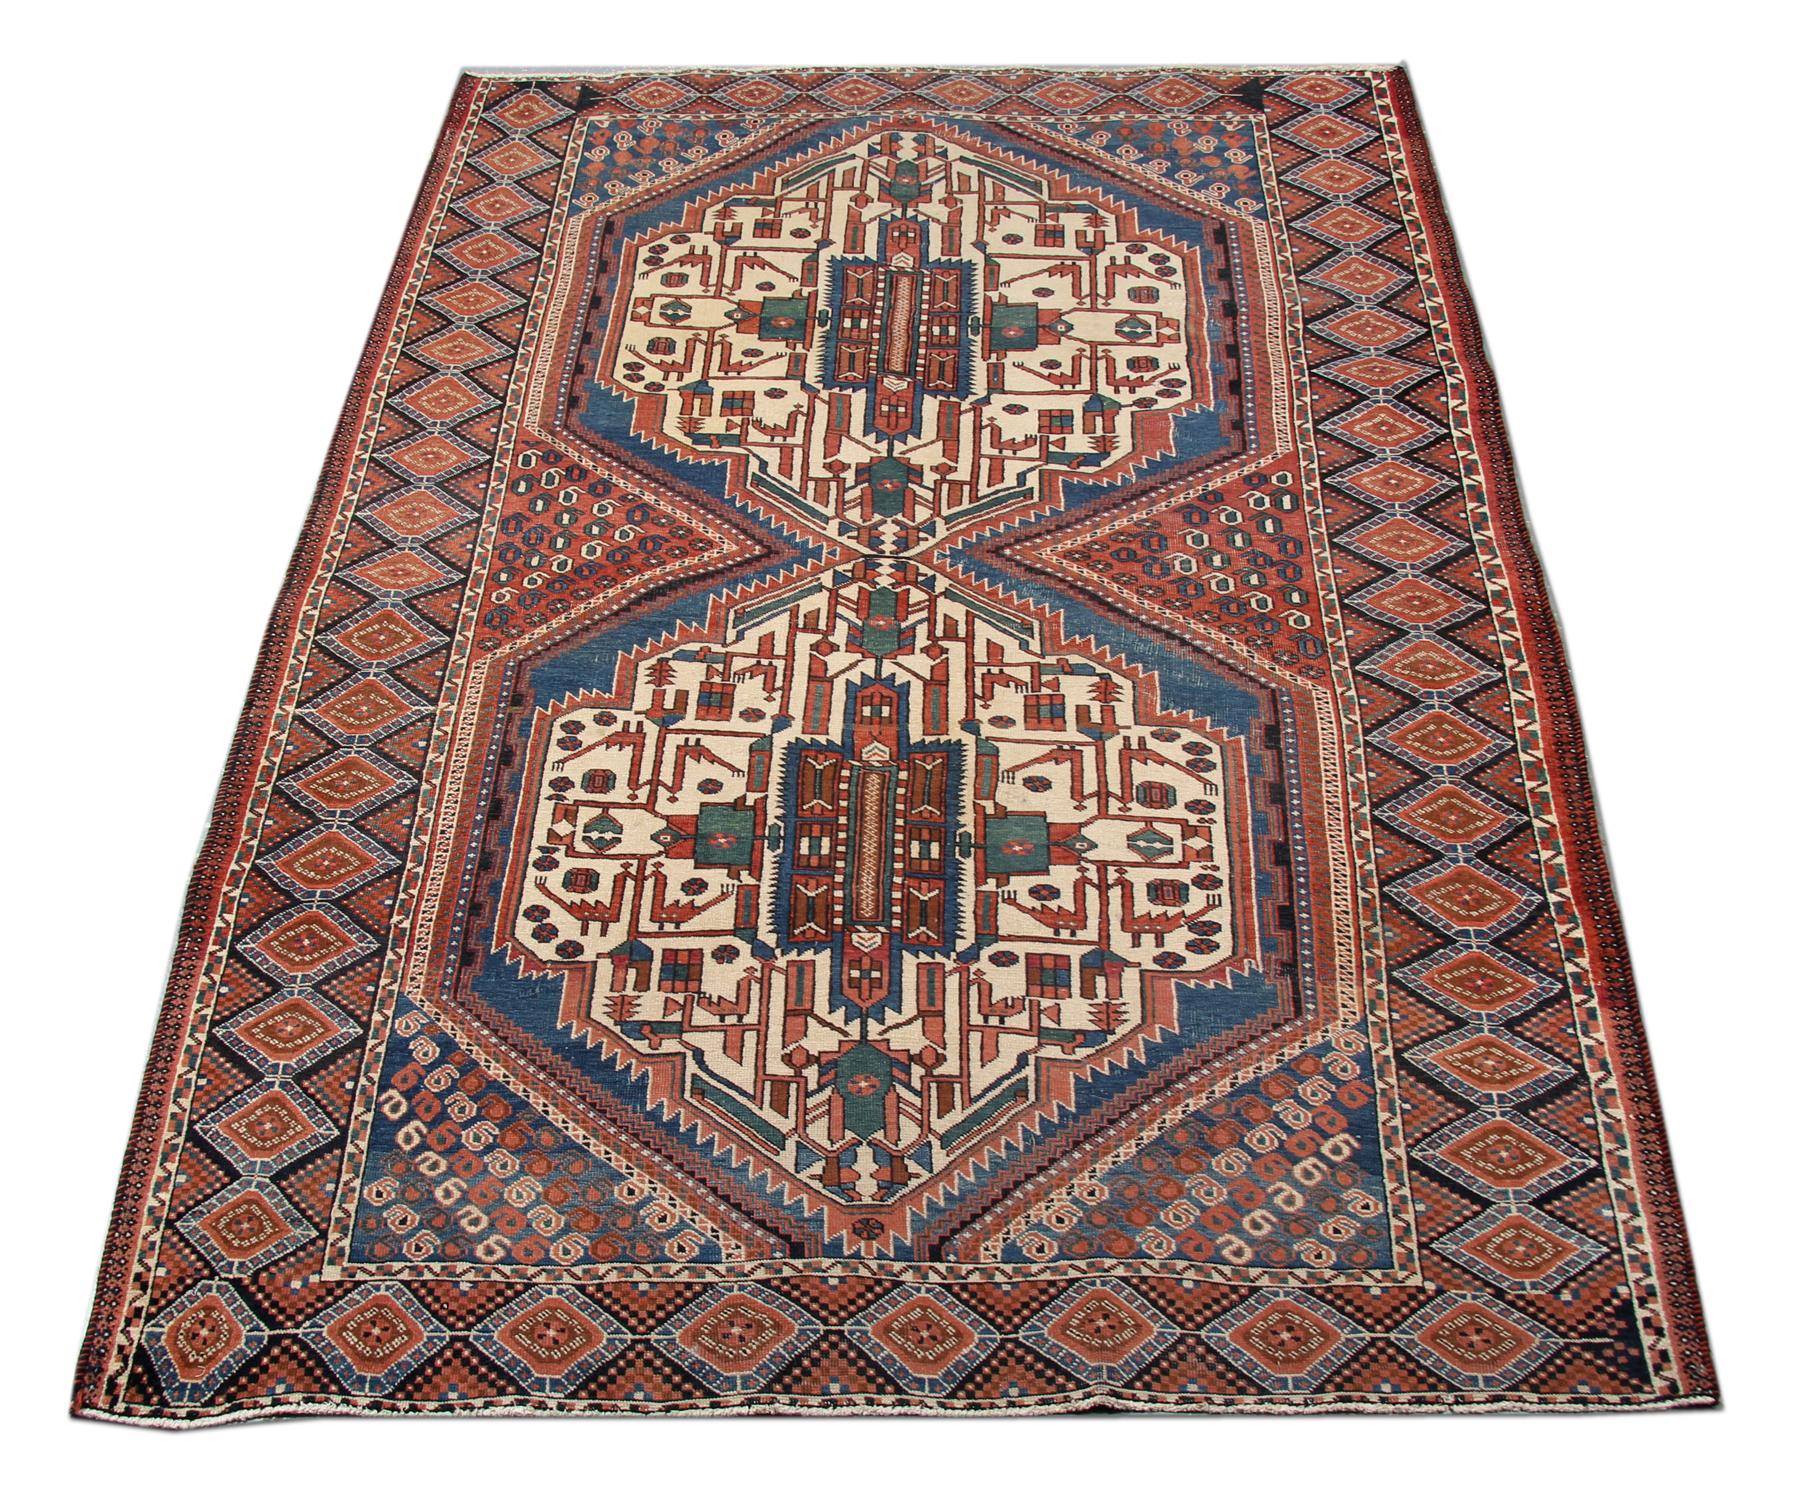 This Traditional wool carpet was handwoven in Ashfar. Hand-spun wool and cotton have been used in the construction, dyed using organic vegetable dyes. The two symmetrical central medallions have intricate motifs woven in colours of green, red and